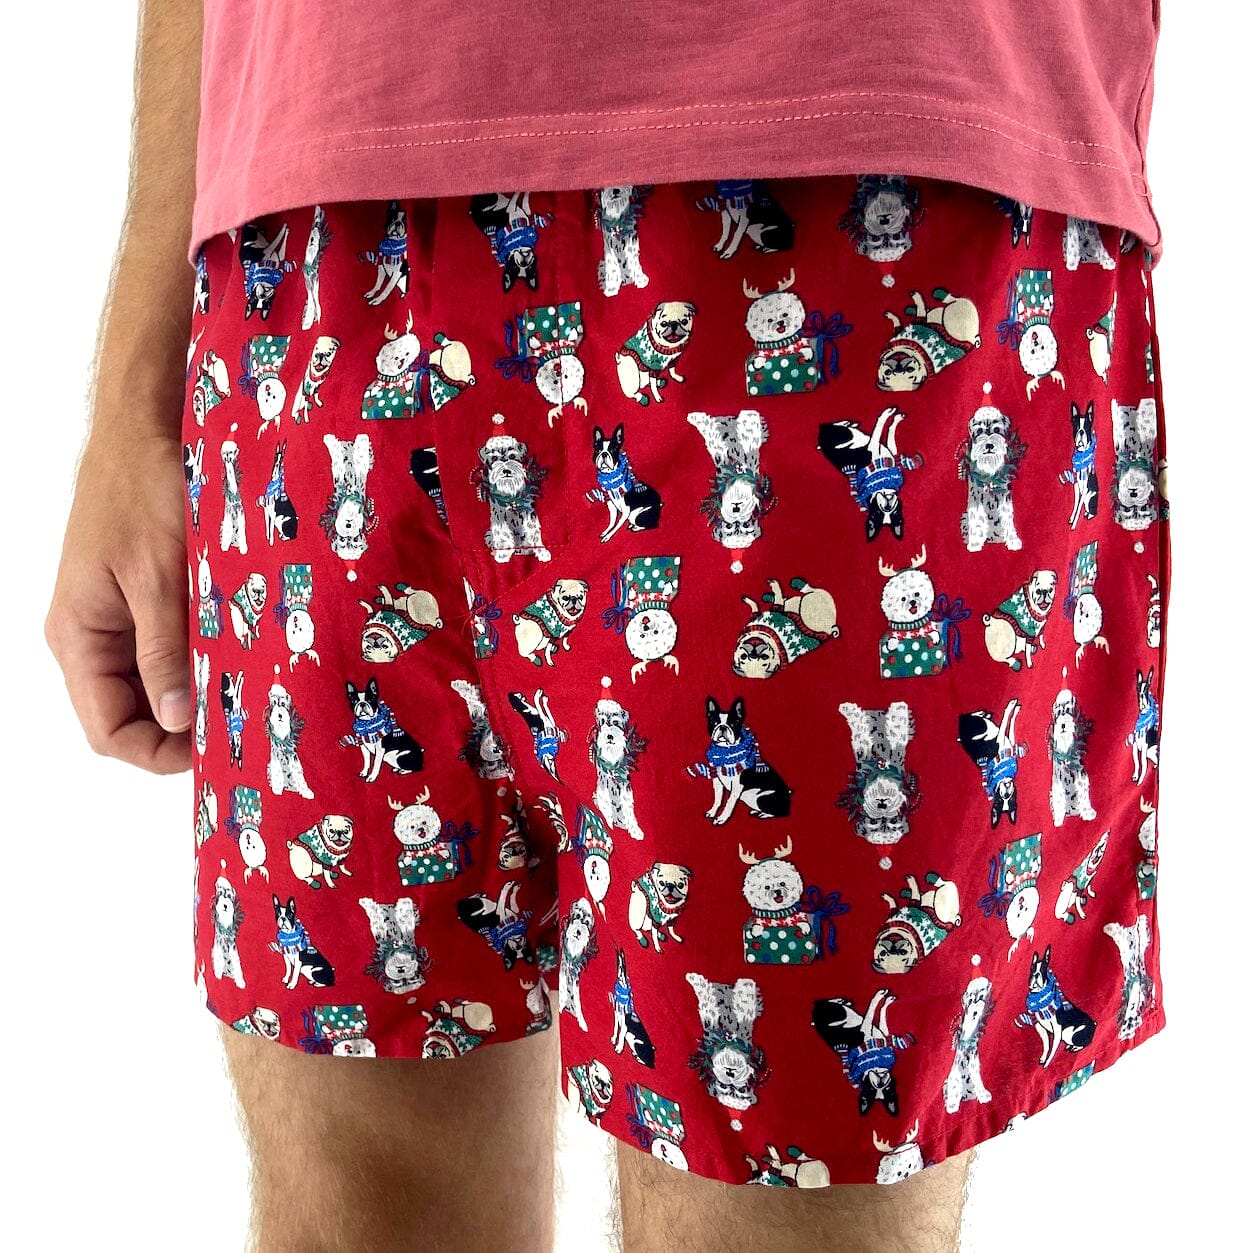 Fun Festive Christmas Puppy Dog Patterned Cotton Boxer Shorts for Men